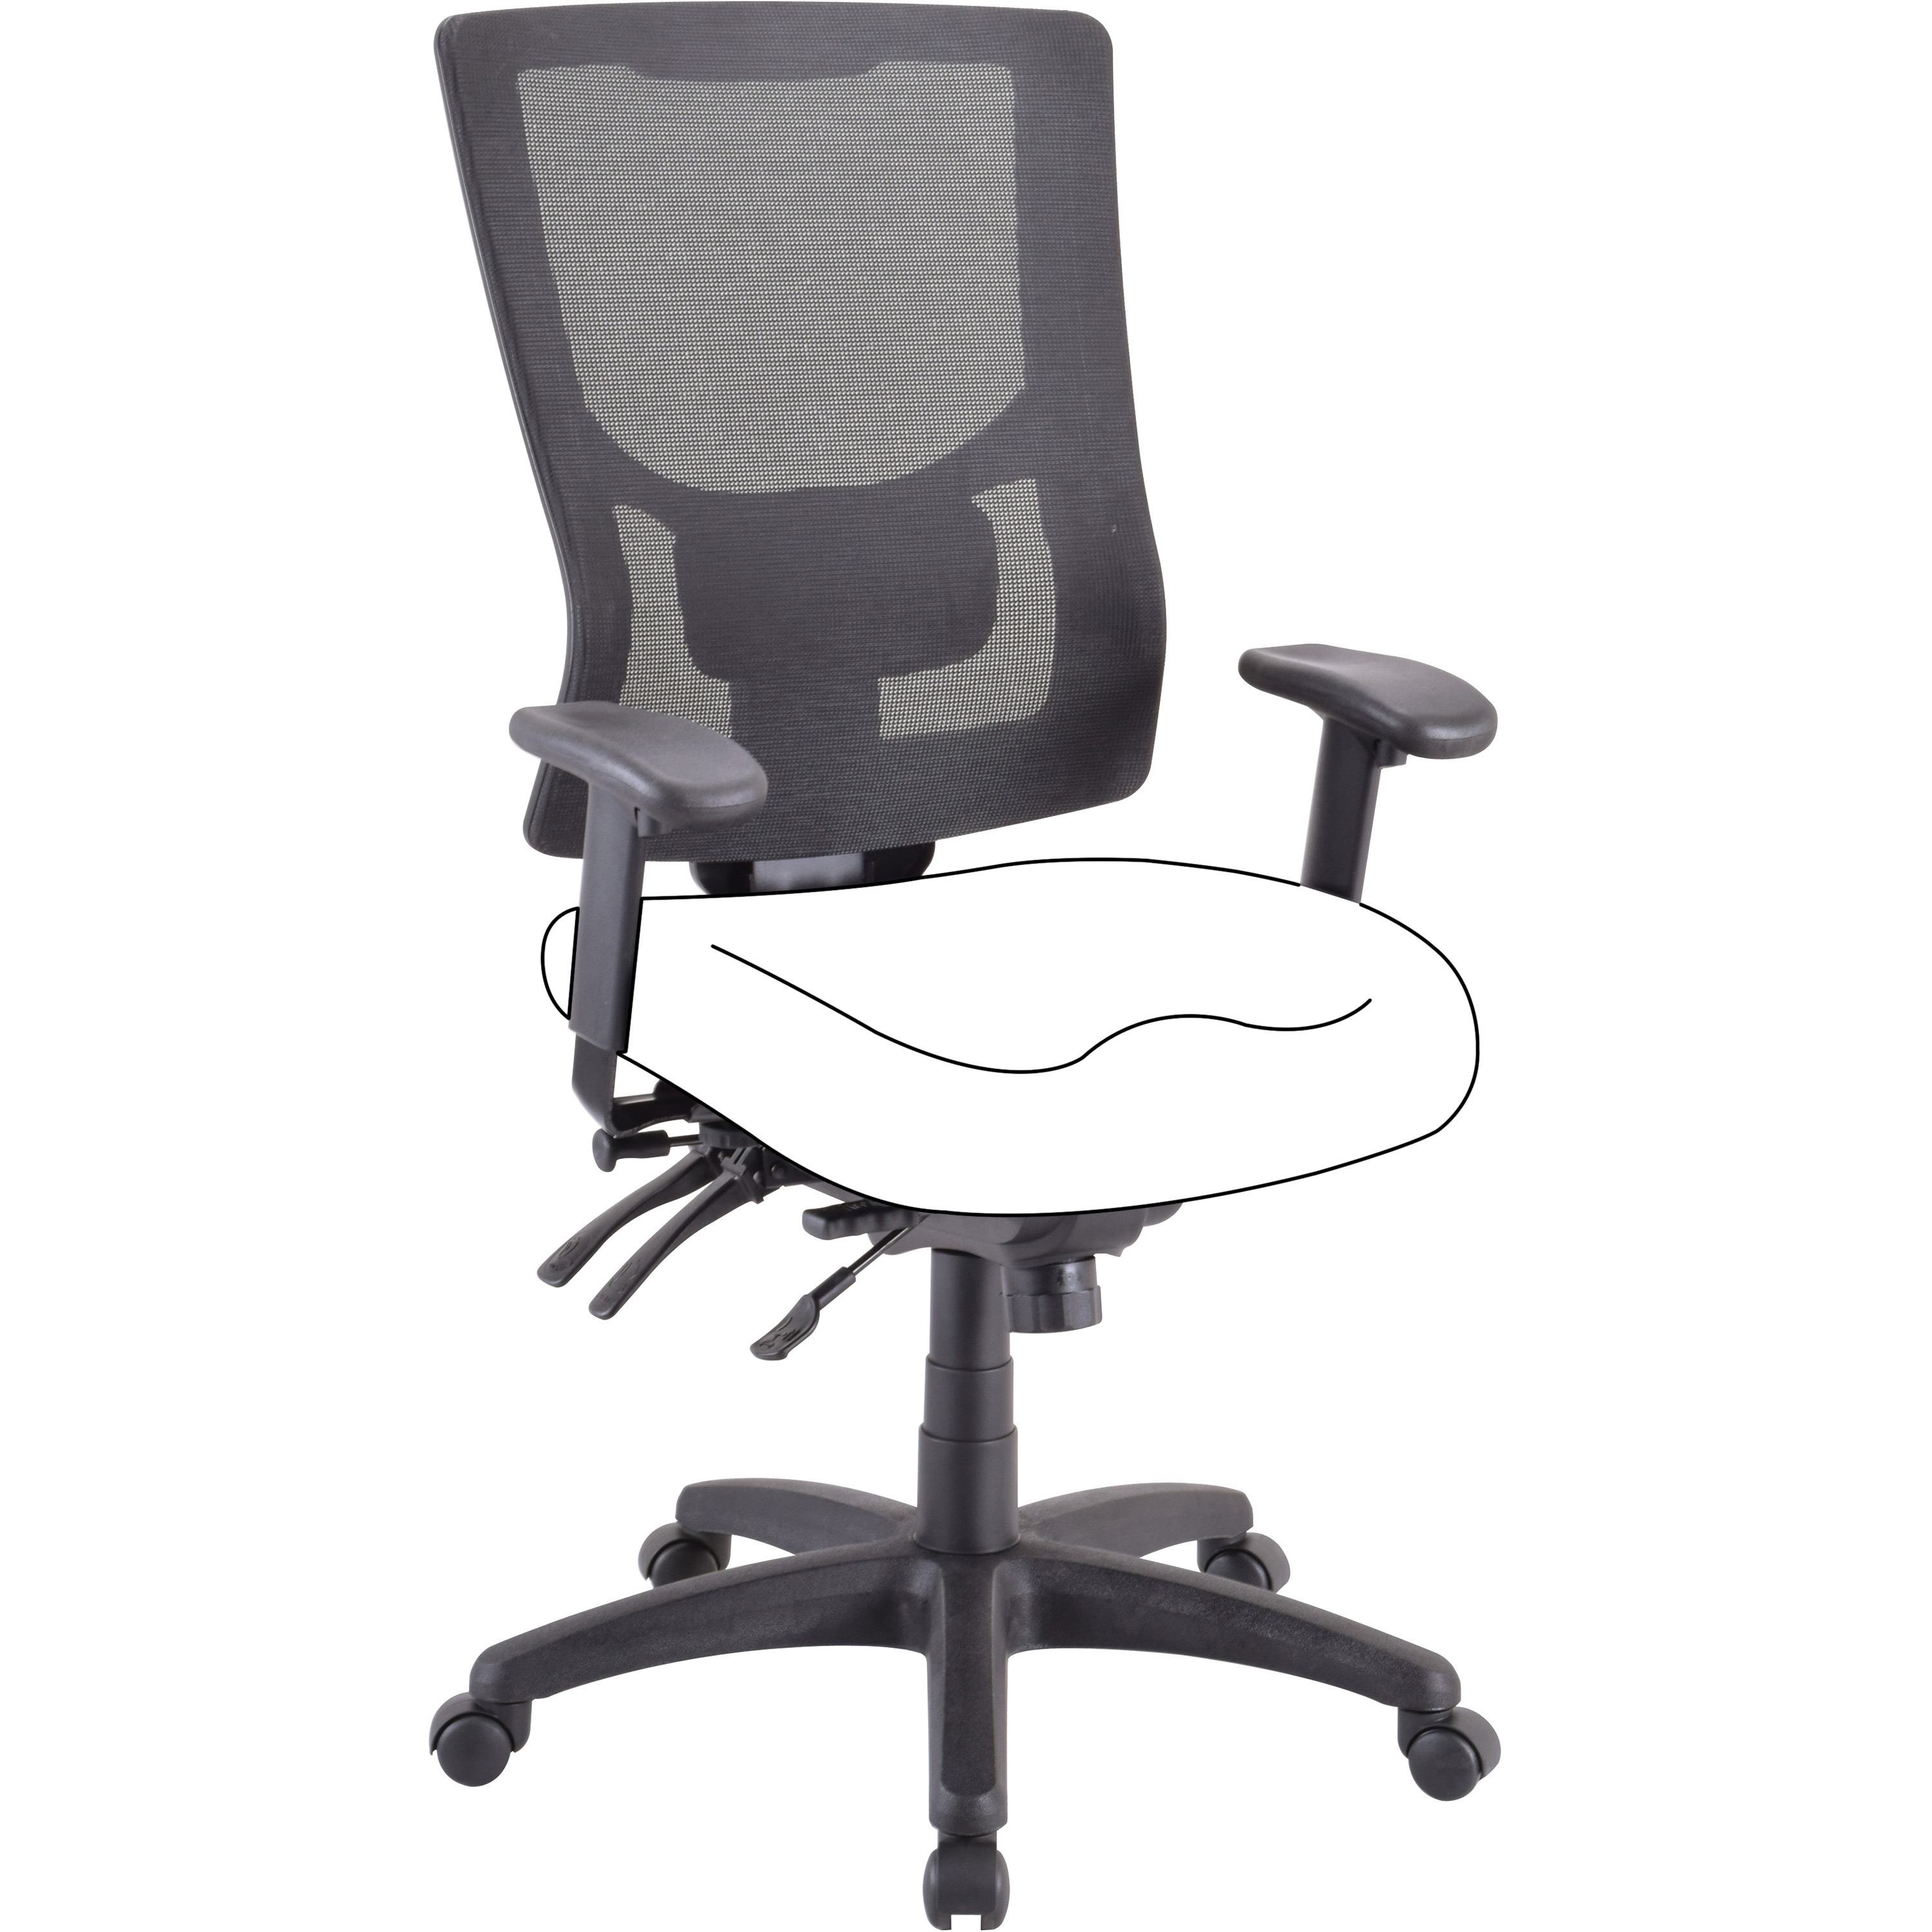 Lorell Padded Fabric Seat Cushion for Conjure Executive LLR62007, LLR 62007  - Office Supply Hut